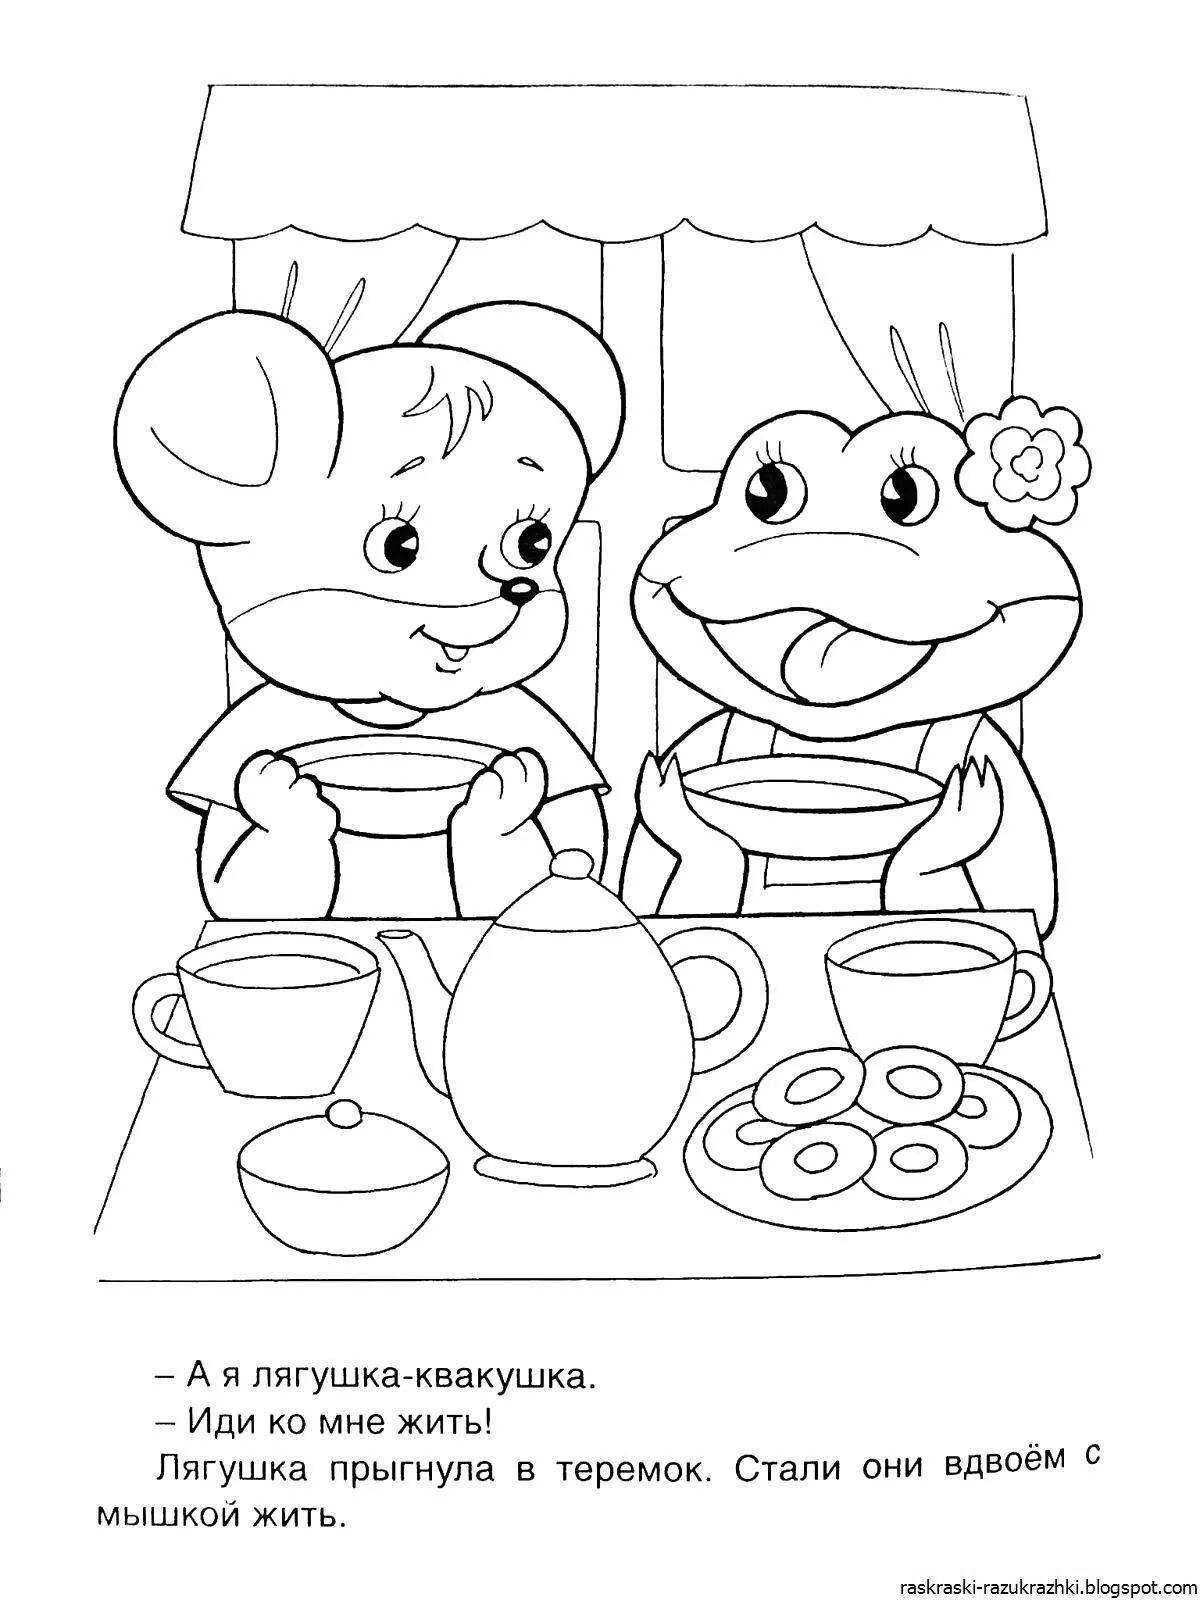 Merry teremok coloring book for children 6-7 years old